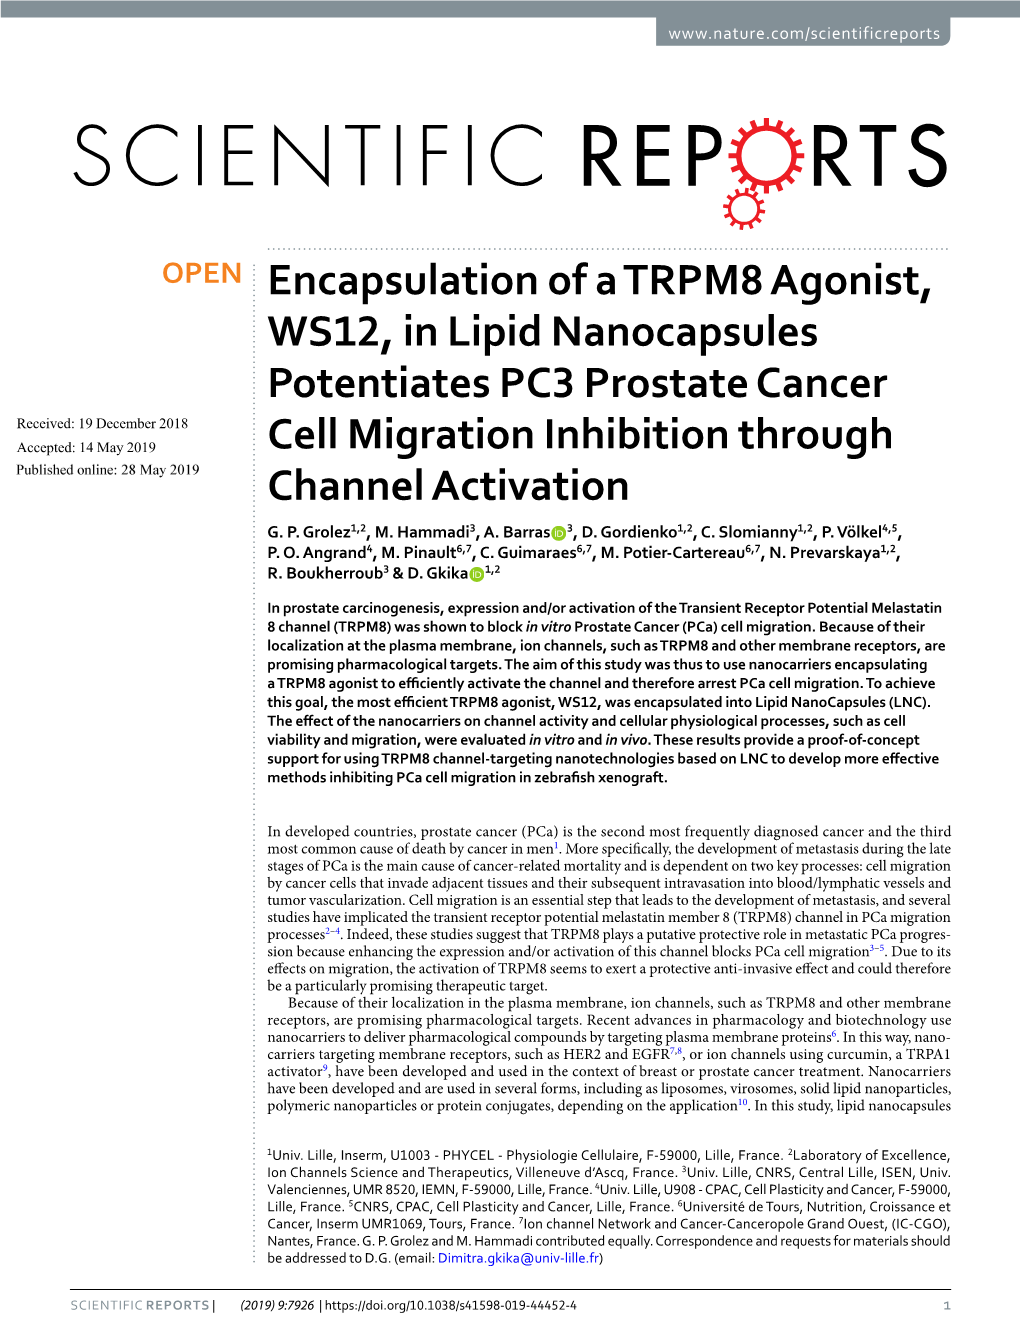 Encapsulation of a TRPM8 Agonist, WS12, in Lipid Nanocapsules Potentiates PC3 Prostate Cancer Cell Migration Inhibition Through